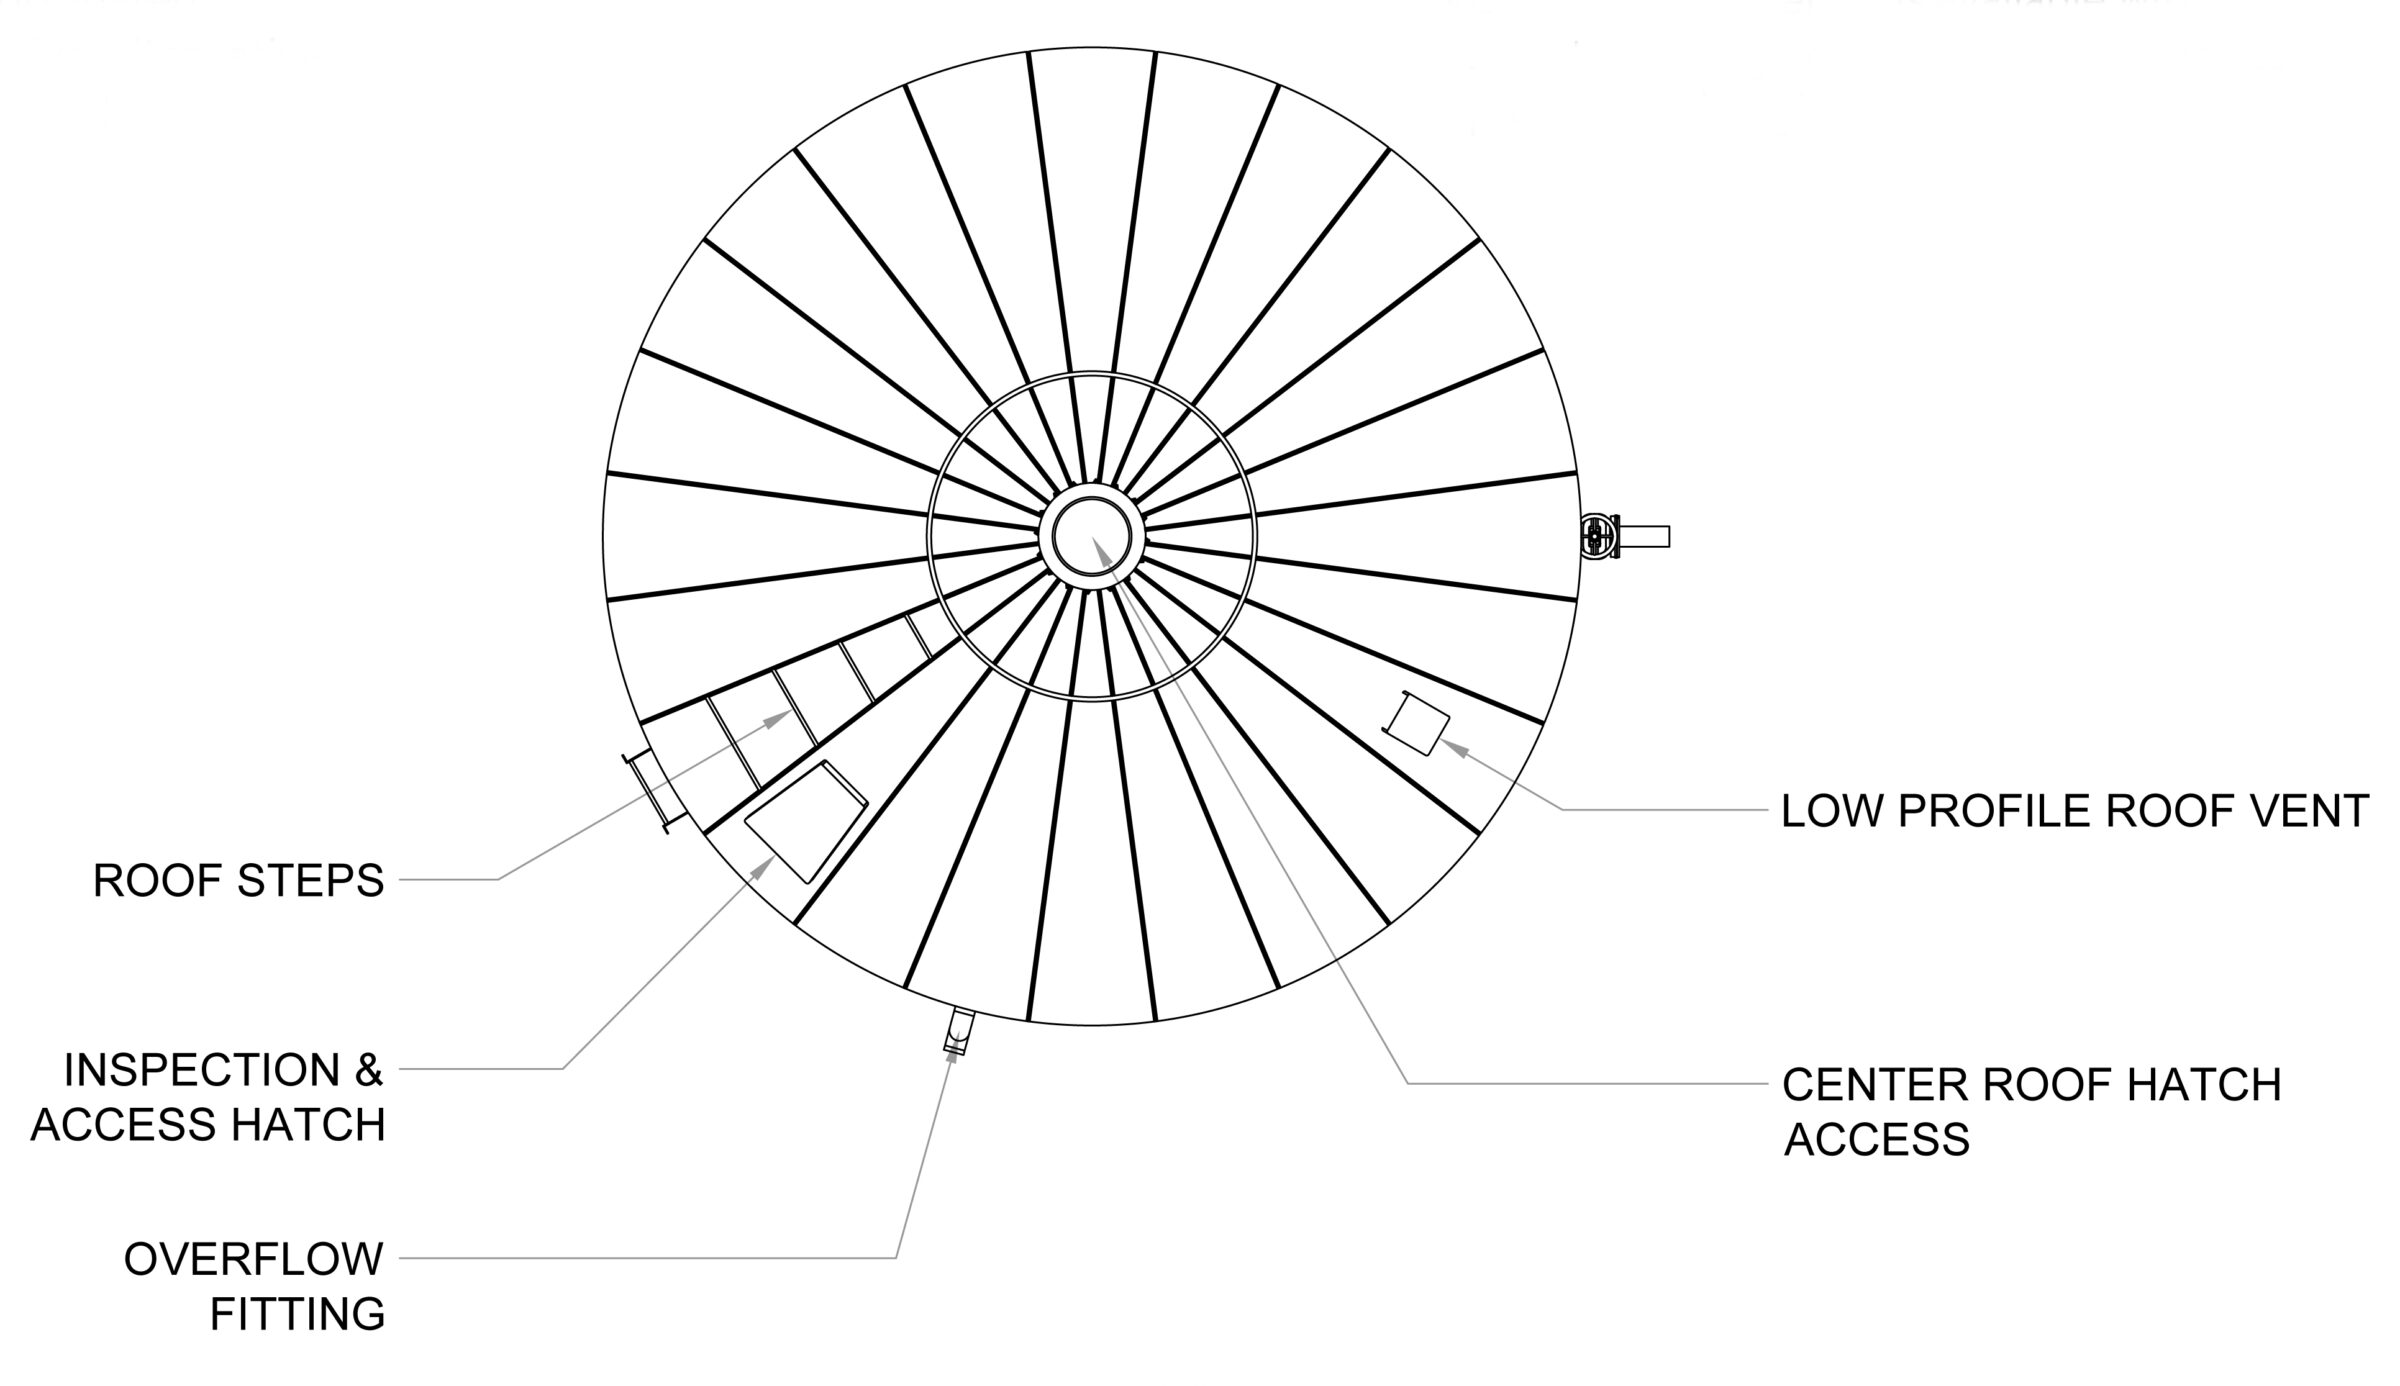 NFPA-22 Galvanized Annotated_wheel